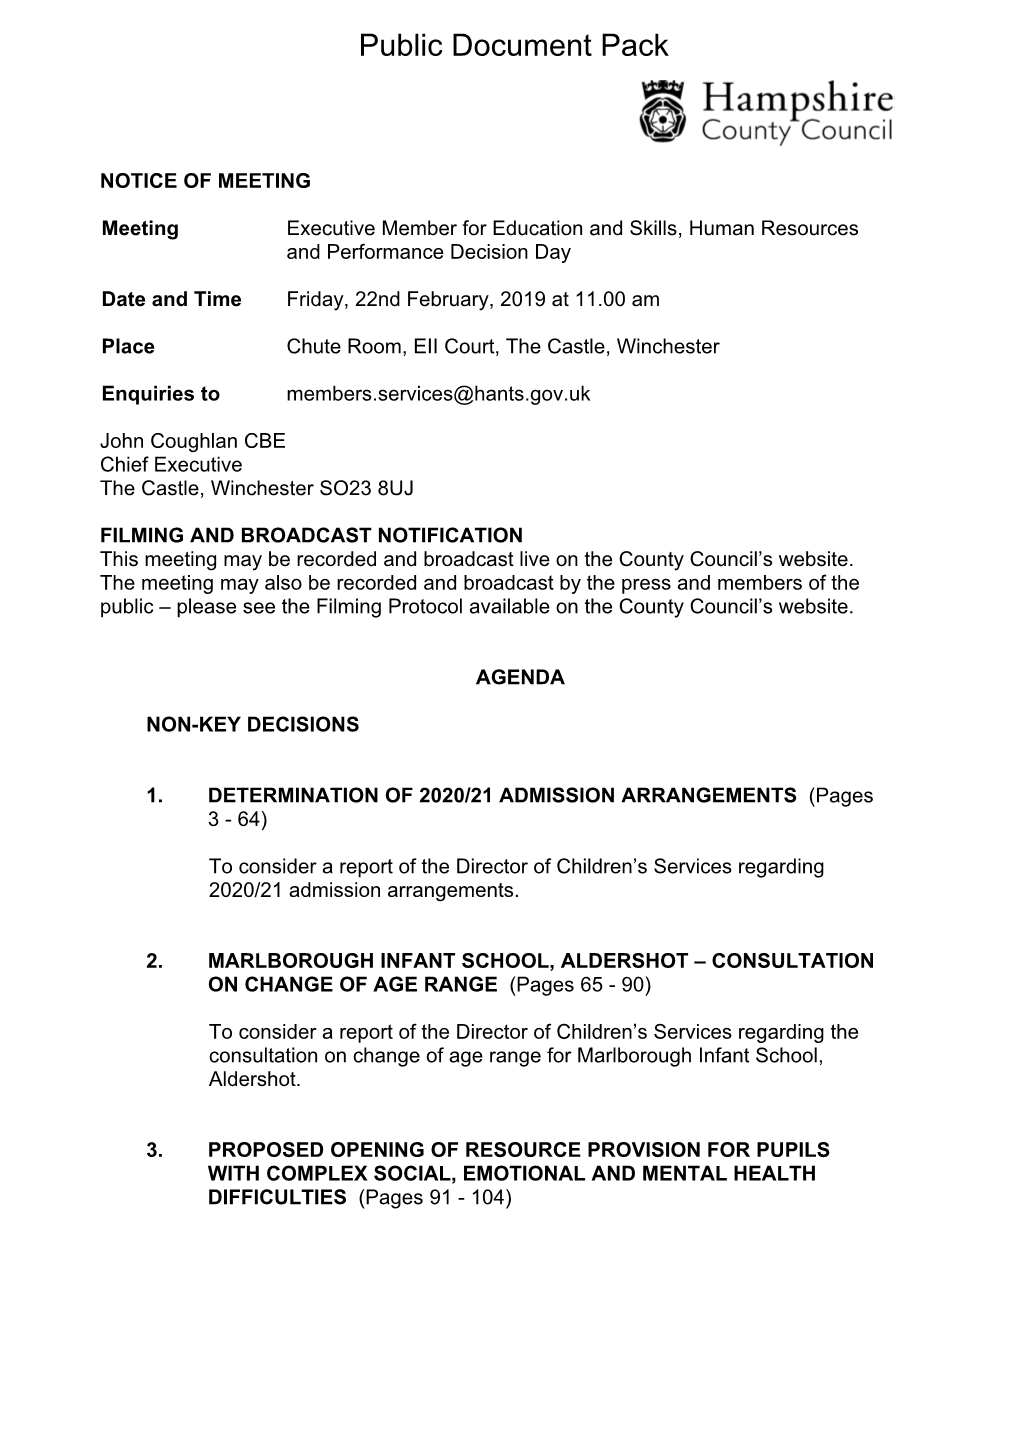 (Public Pack)Agenda Document for Executive Member for Education